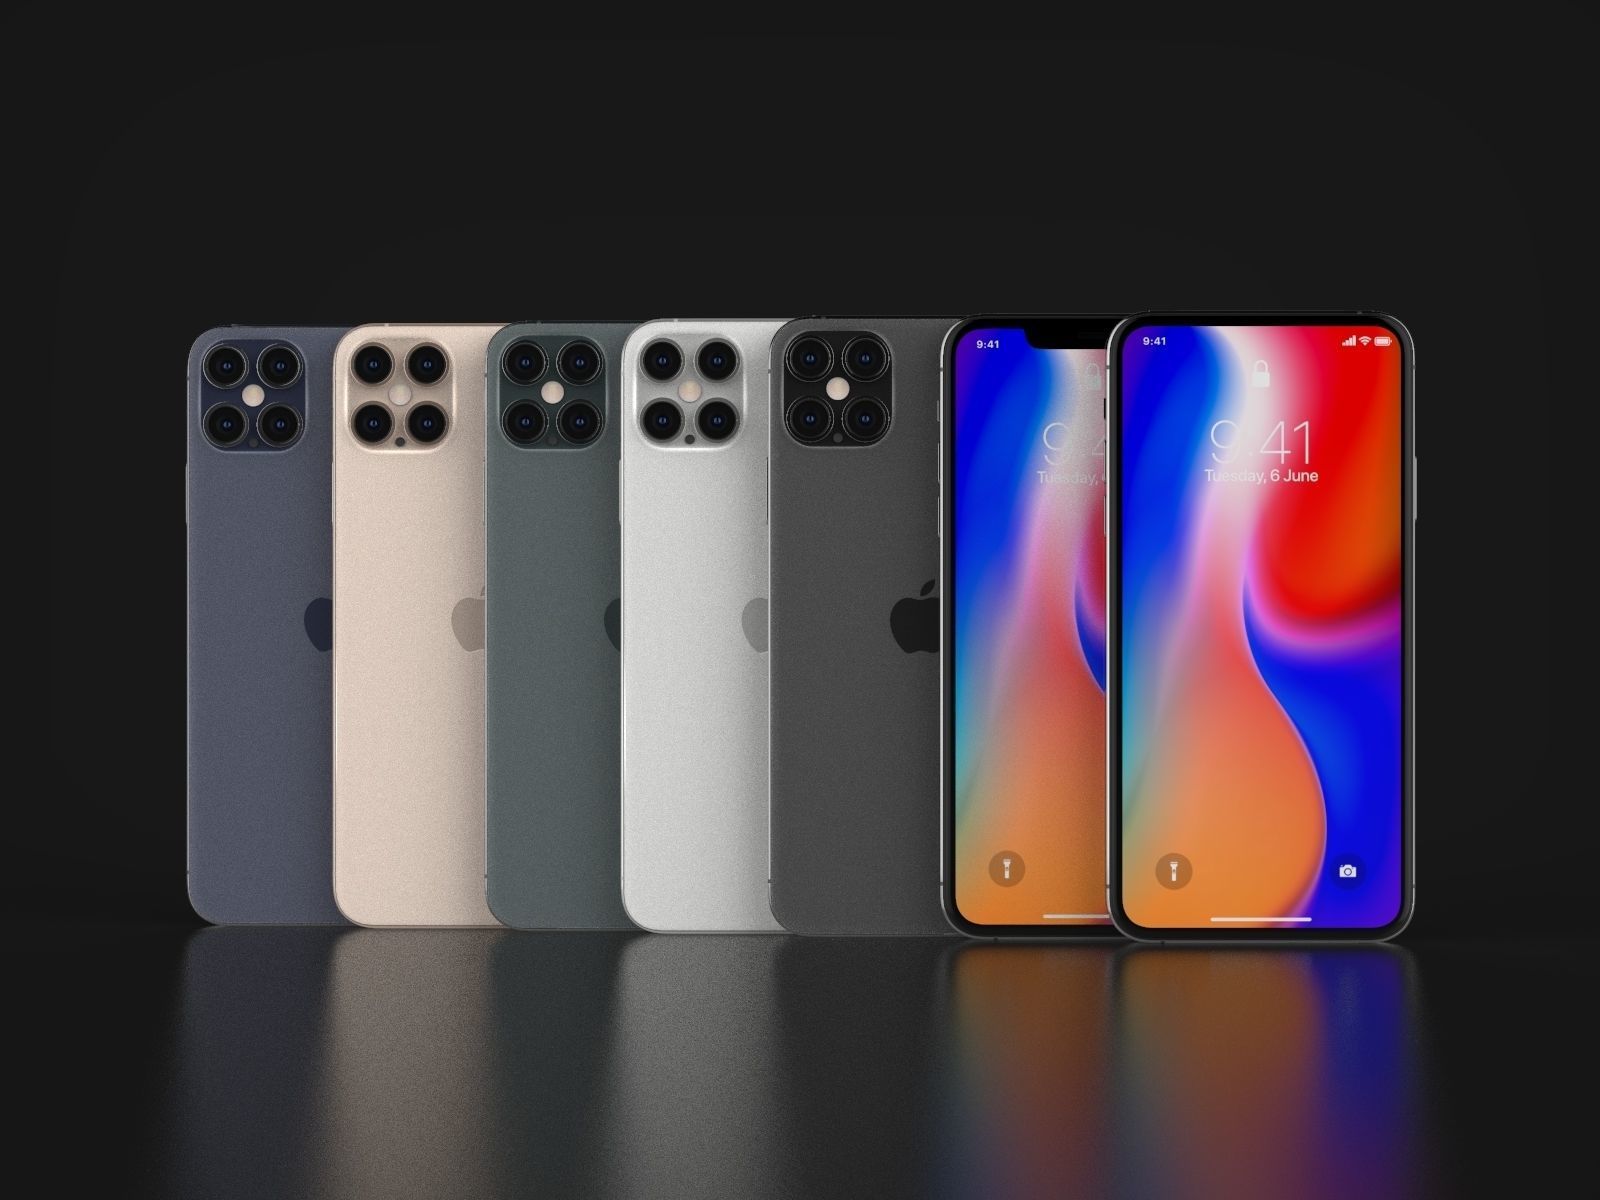 Apple to equip the four upcoming iPhone 12 devices with 5G according to leaks.